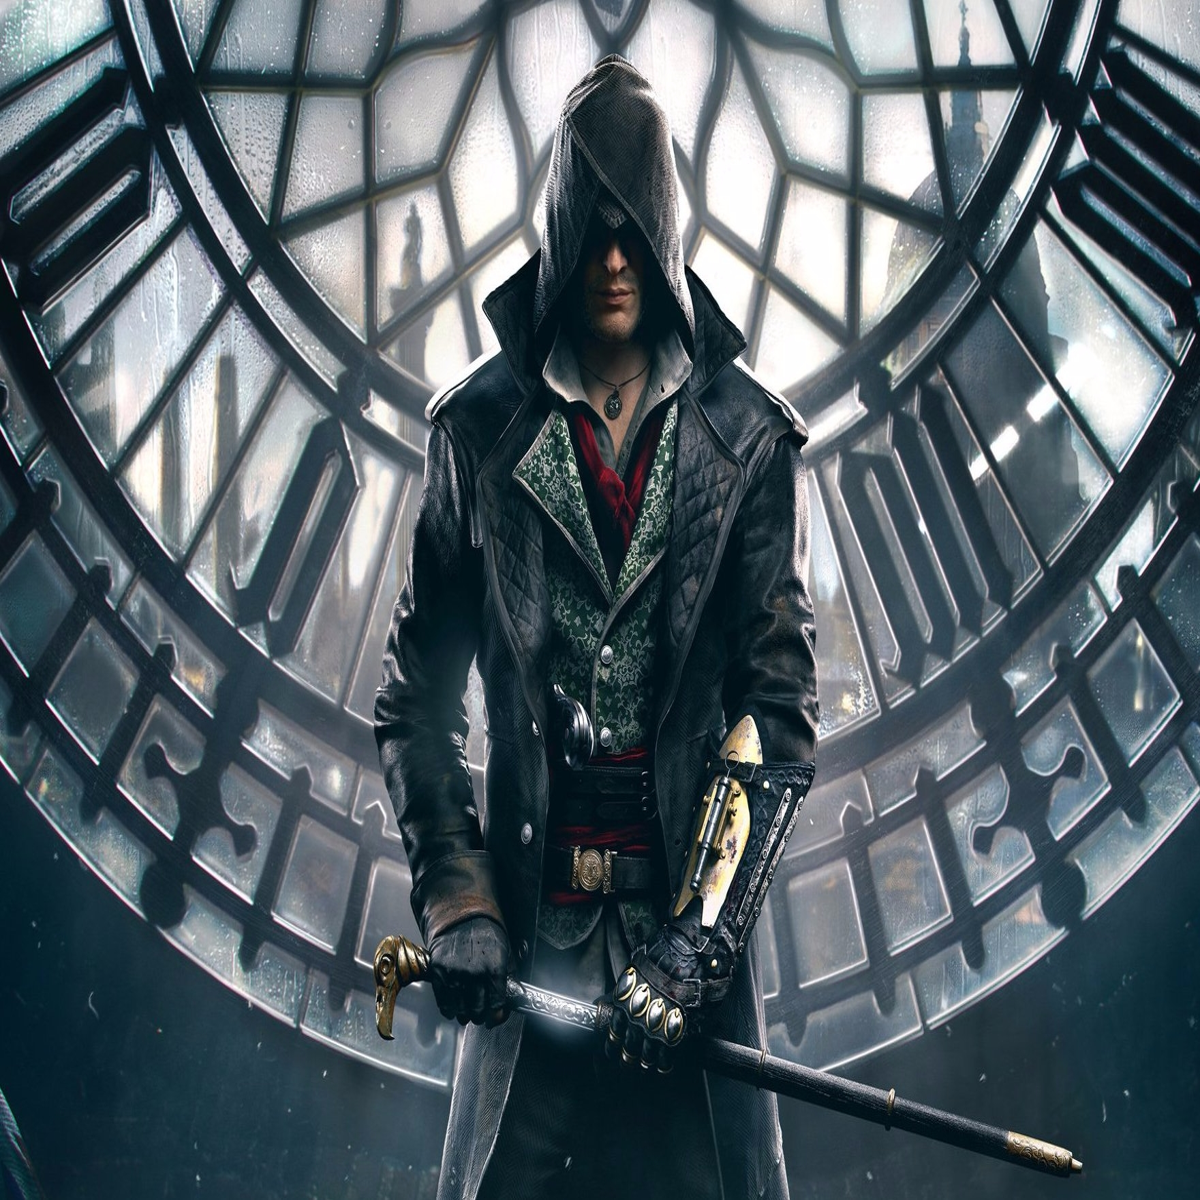 Assassin’s Creed® Syndicate